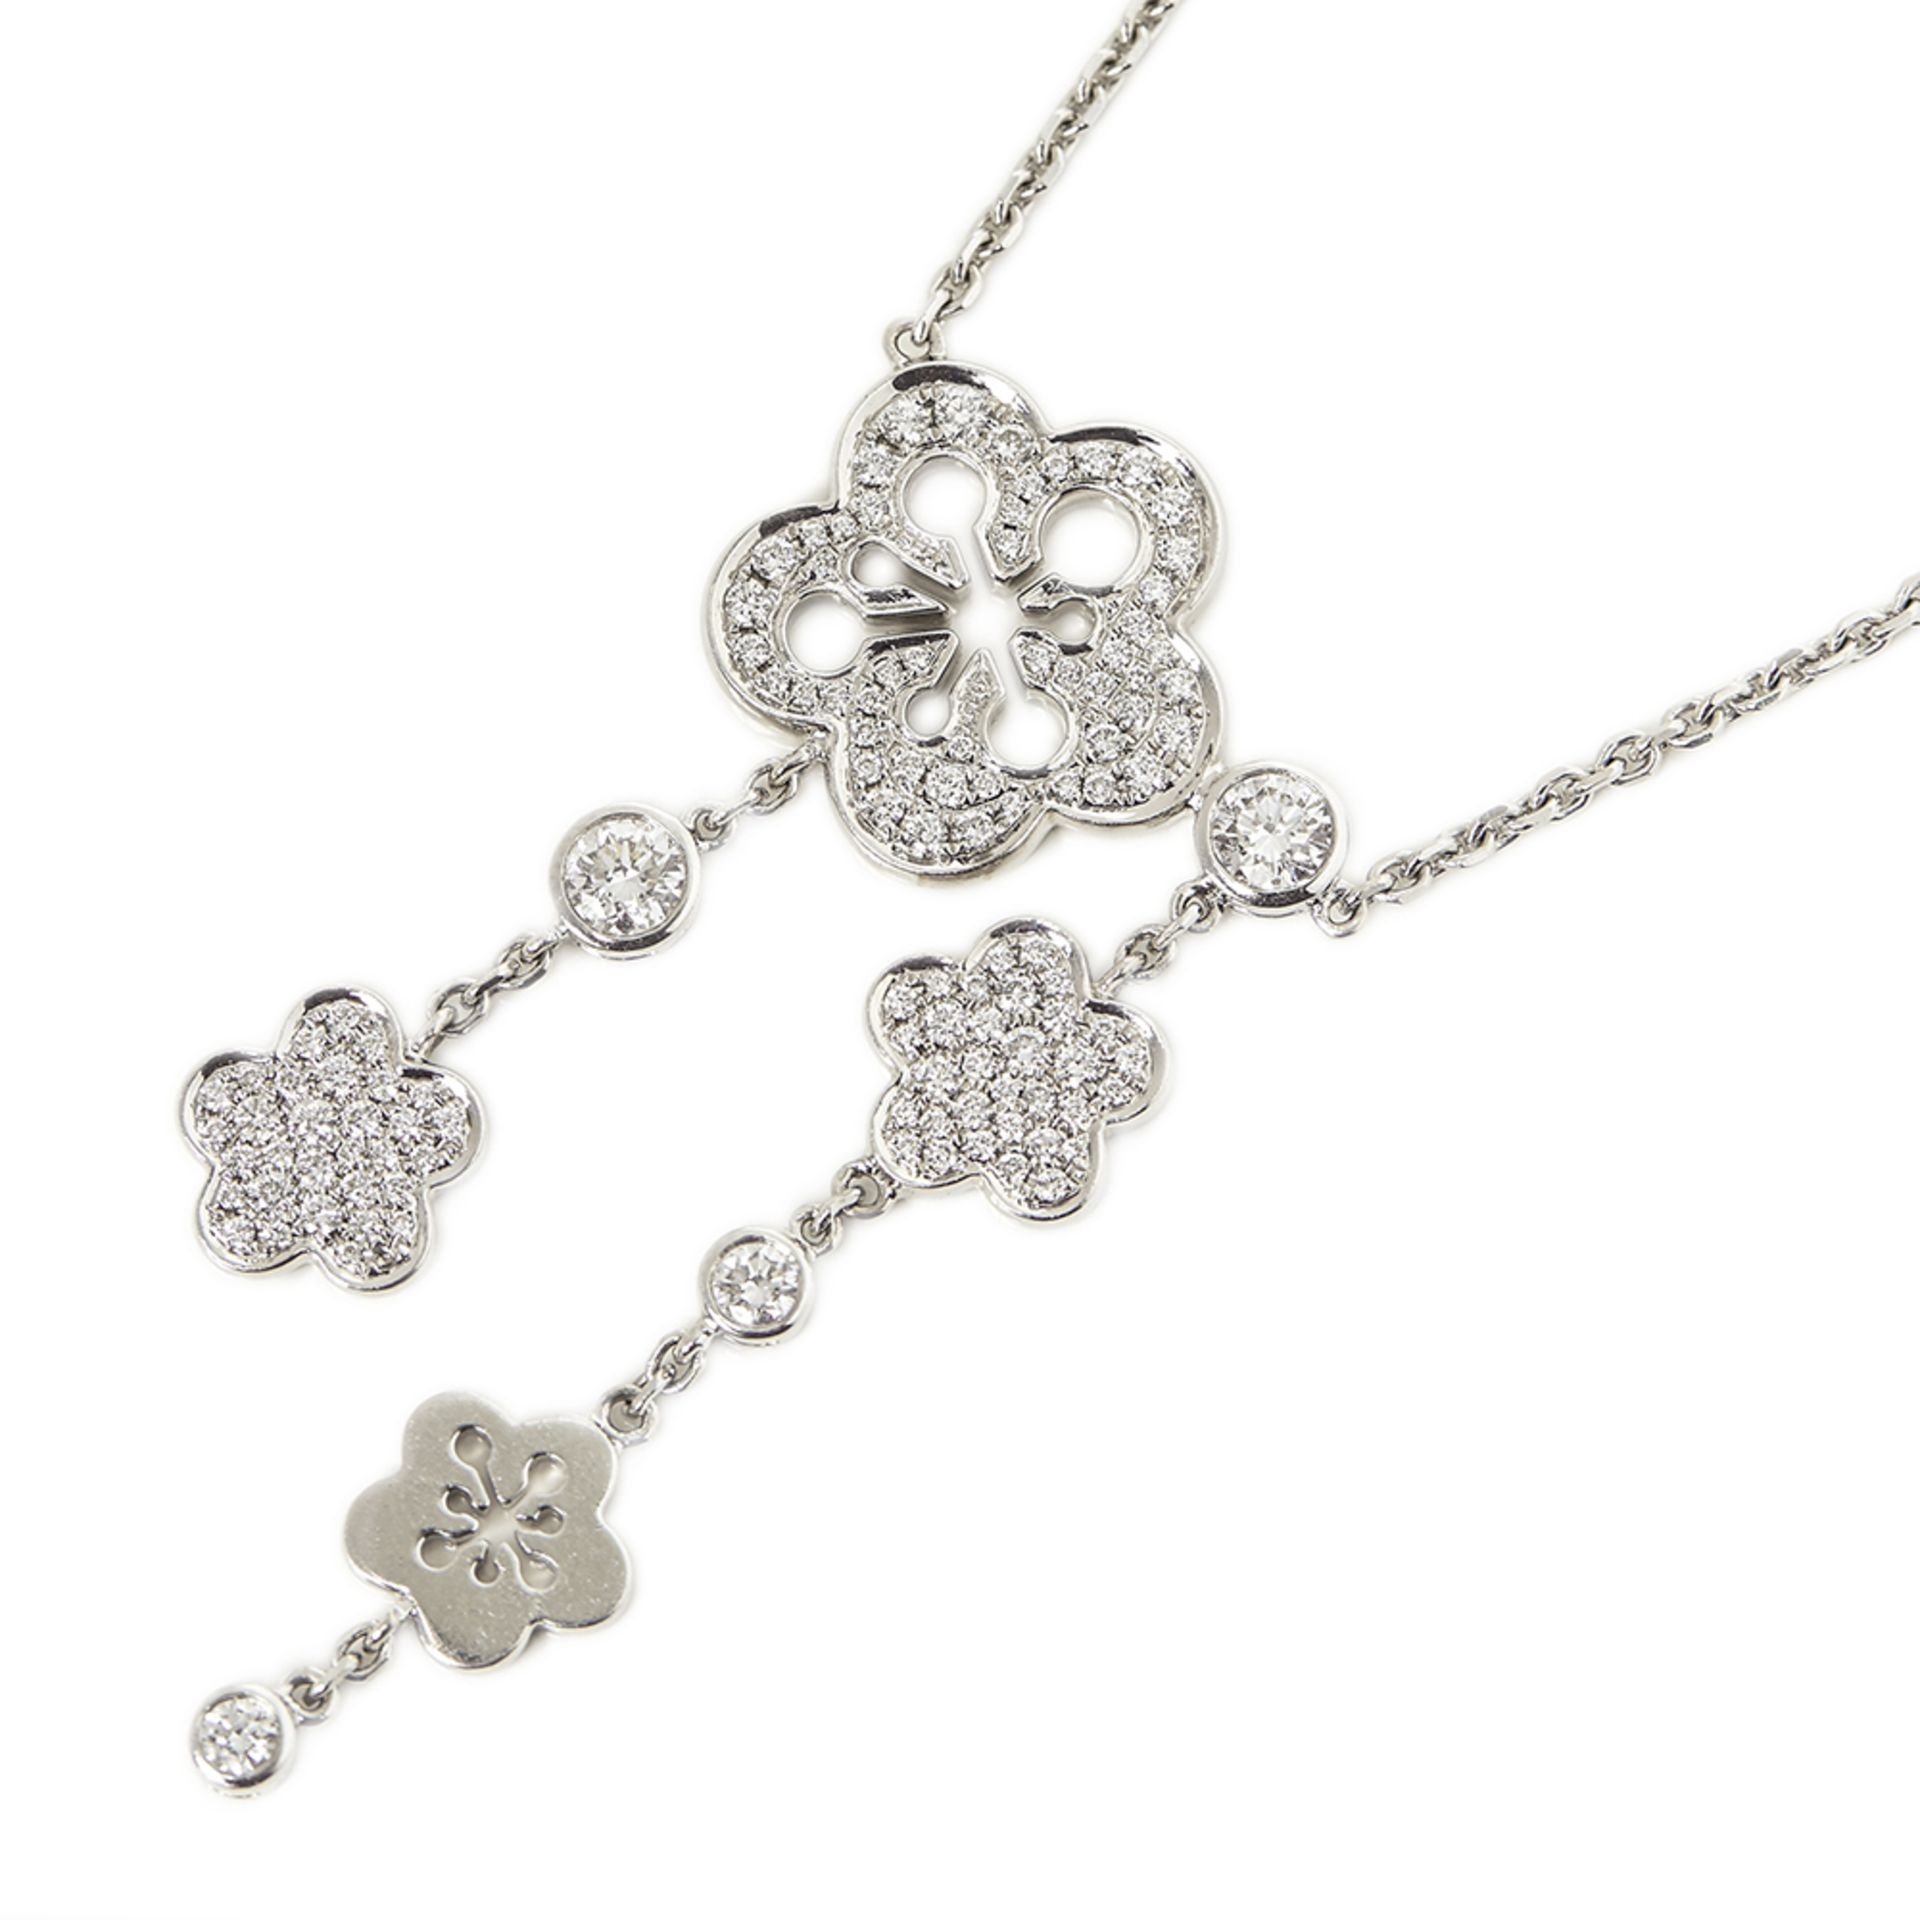 Boodles 18k White Gold Diamond Blossom Necklace - Image 2 of 10